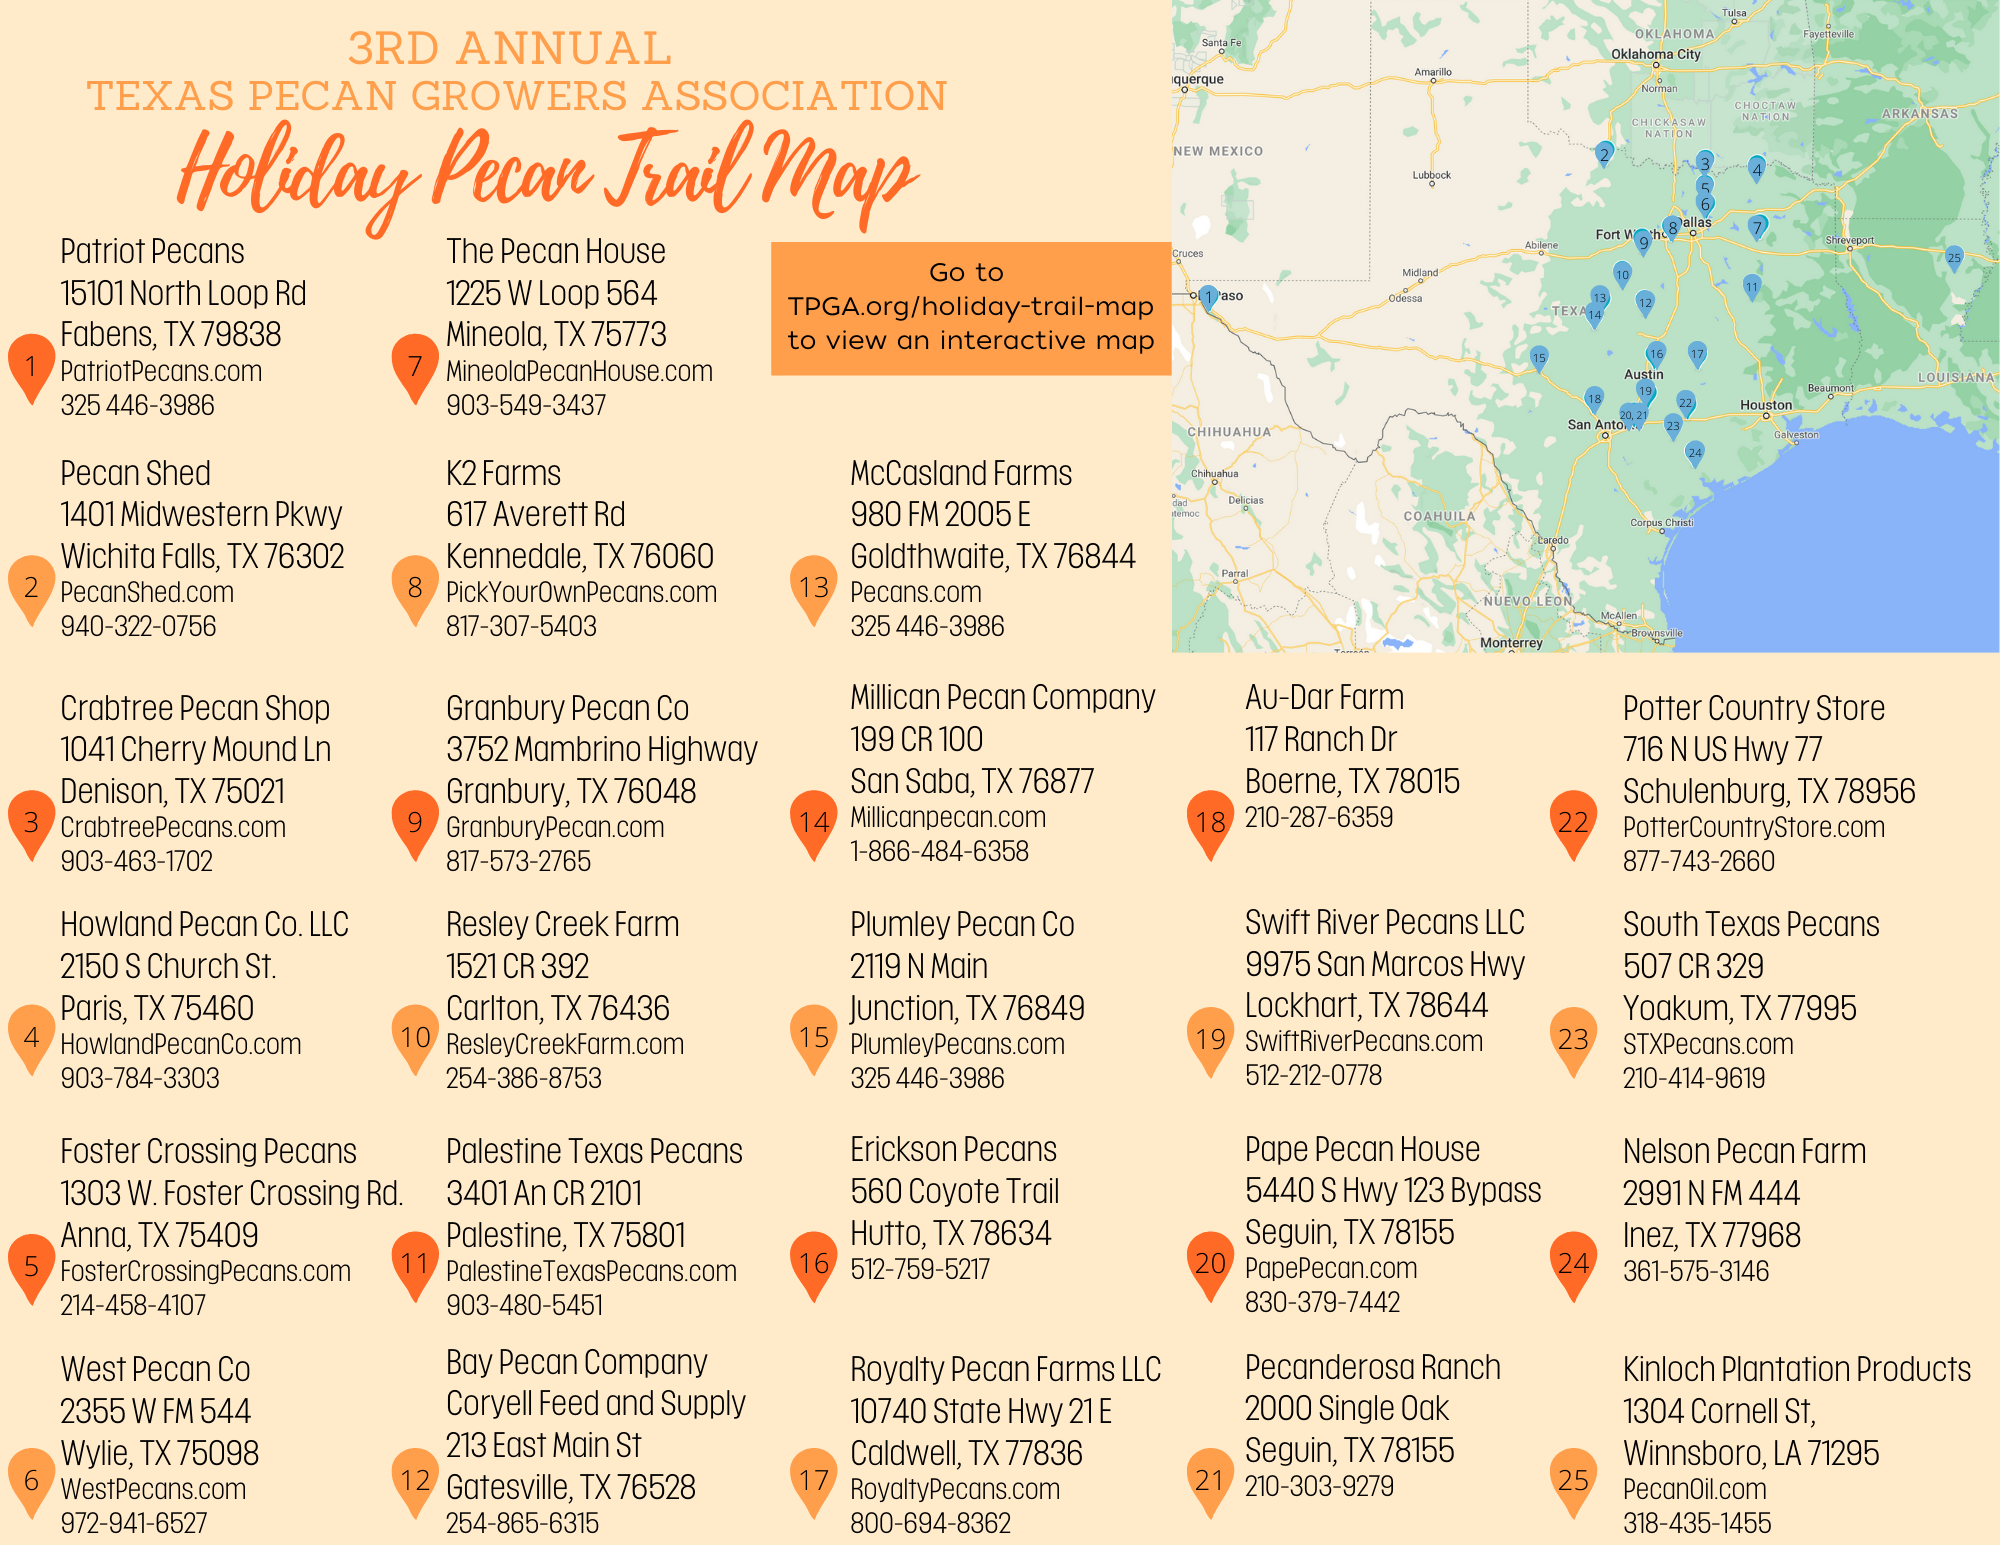 TPGA's Holiday Trail Map shows a list of pecan retail stores and orchards looking to sell to the general public this holiday season.